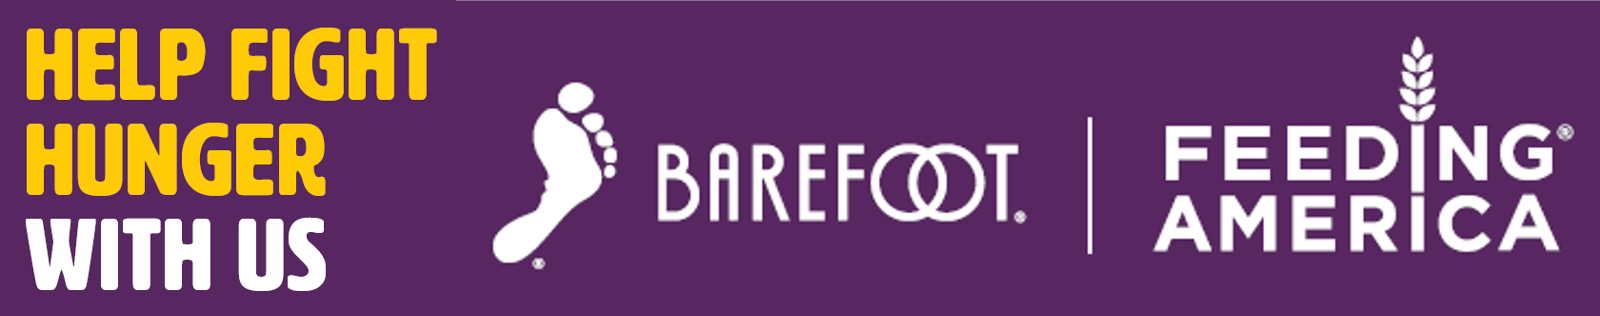 barefoot wine campaign